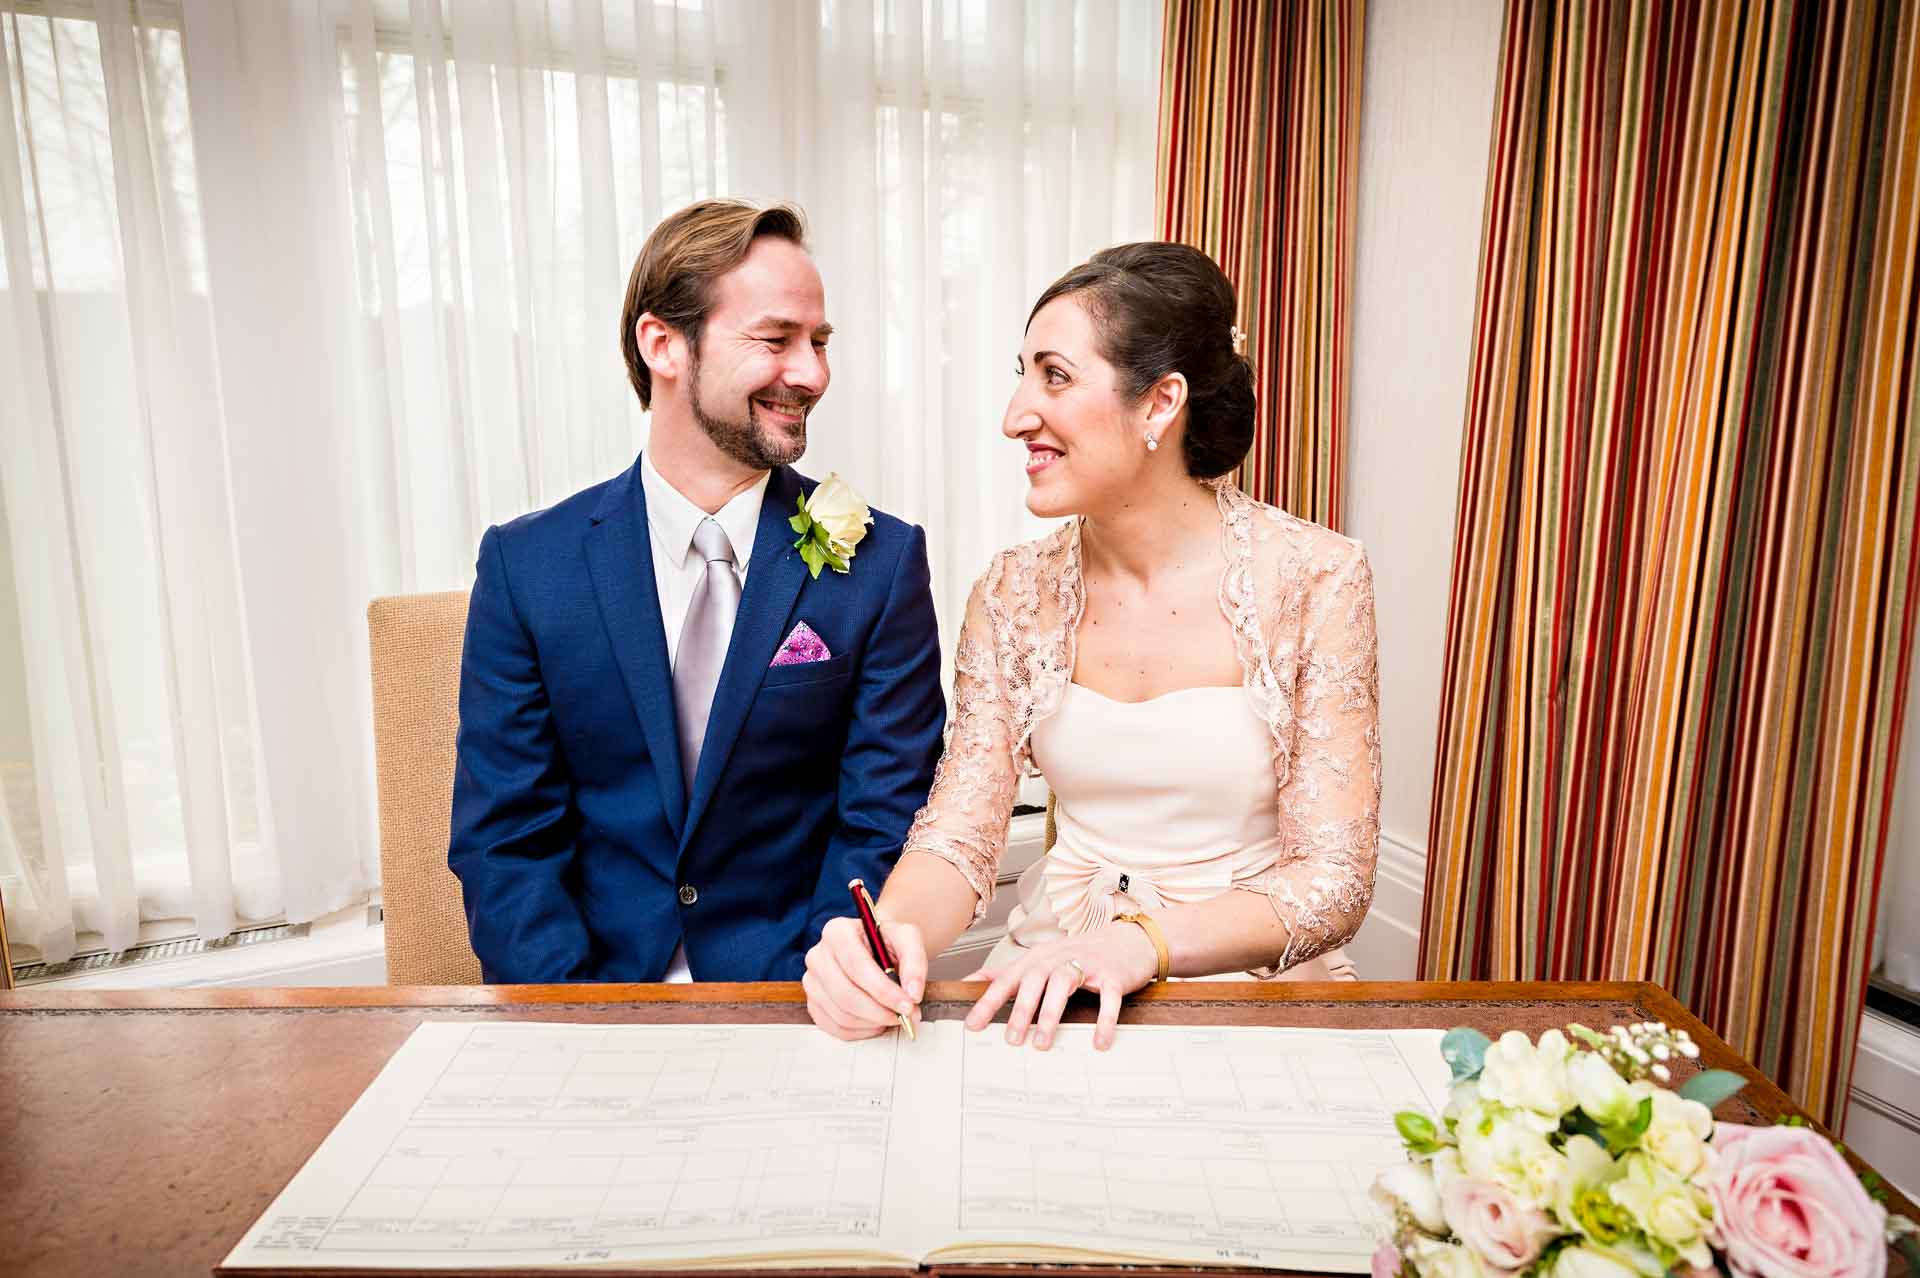 Dummy Wedding Register Signing with Couple Looking at Each Other